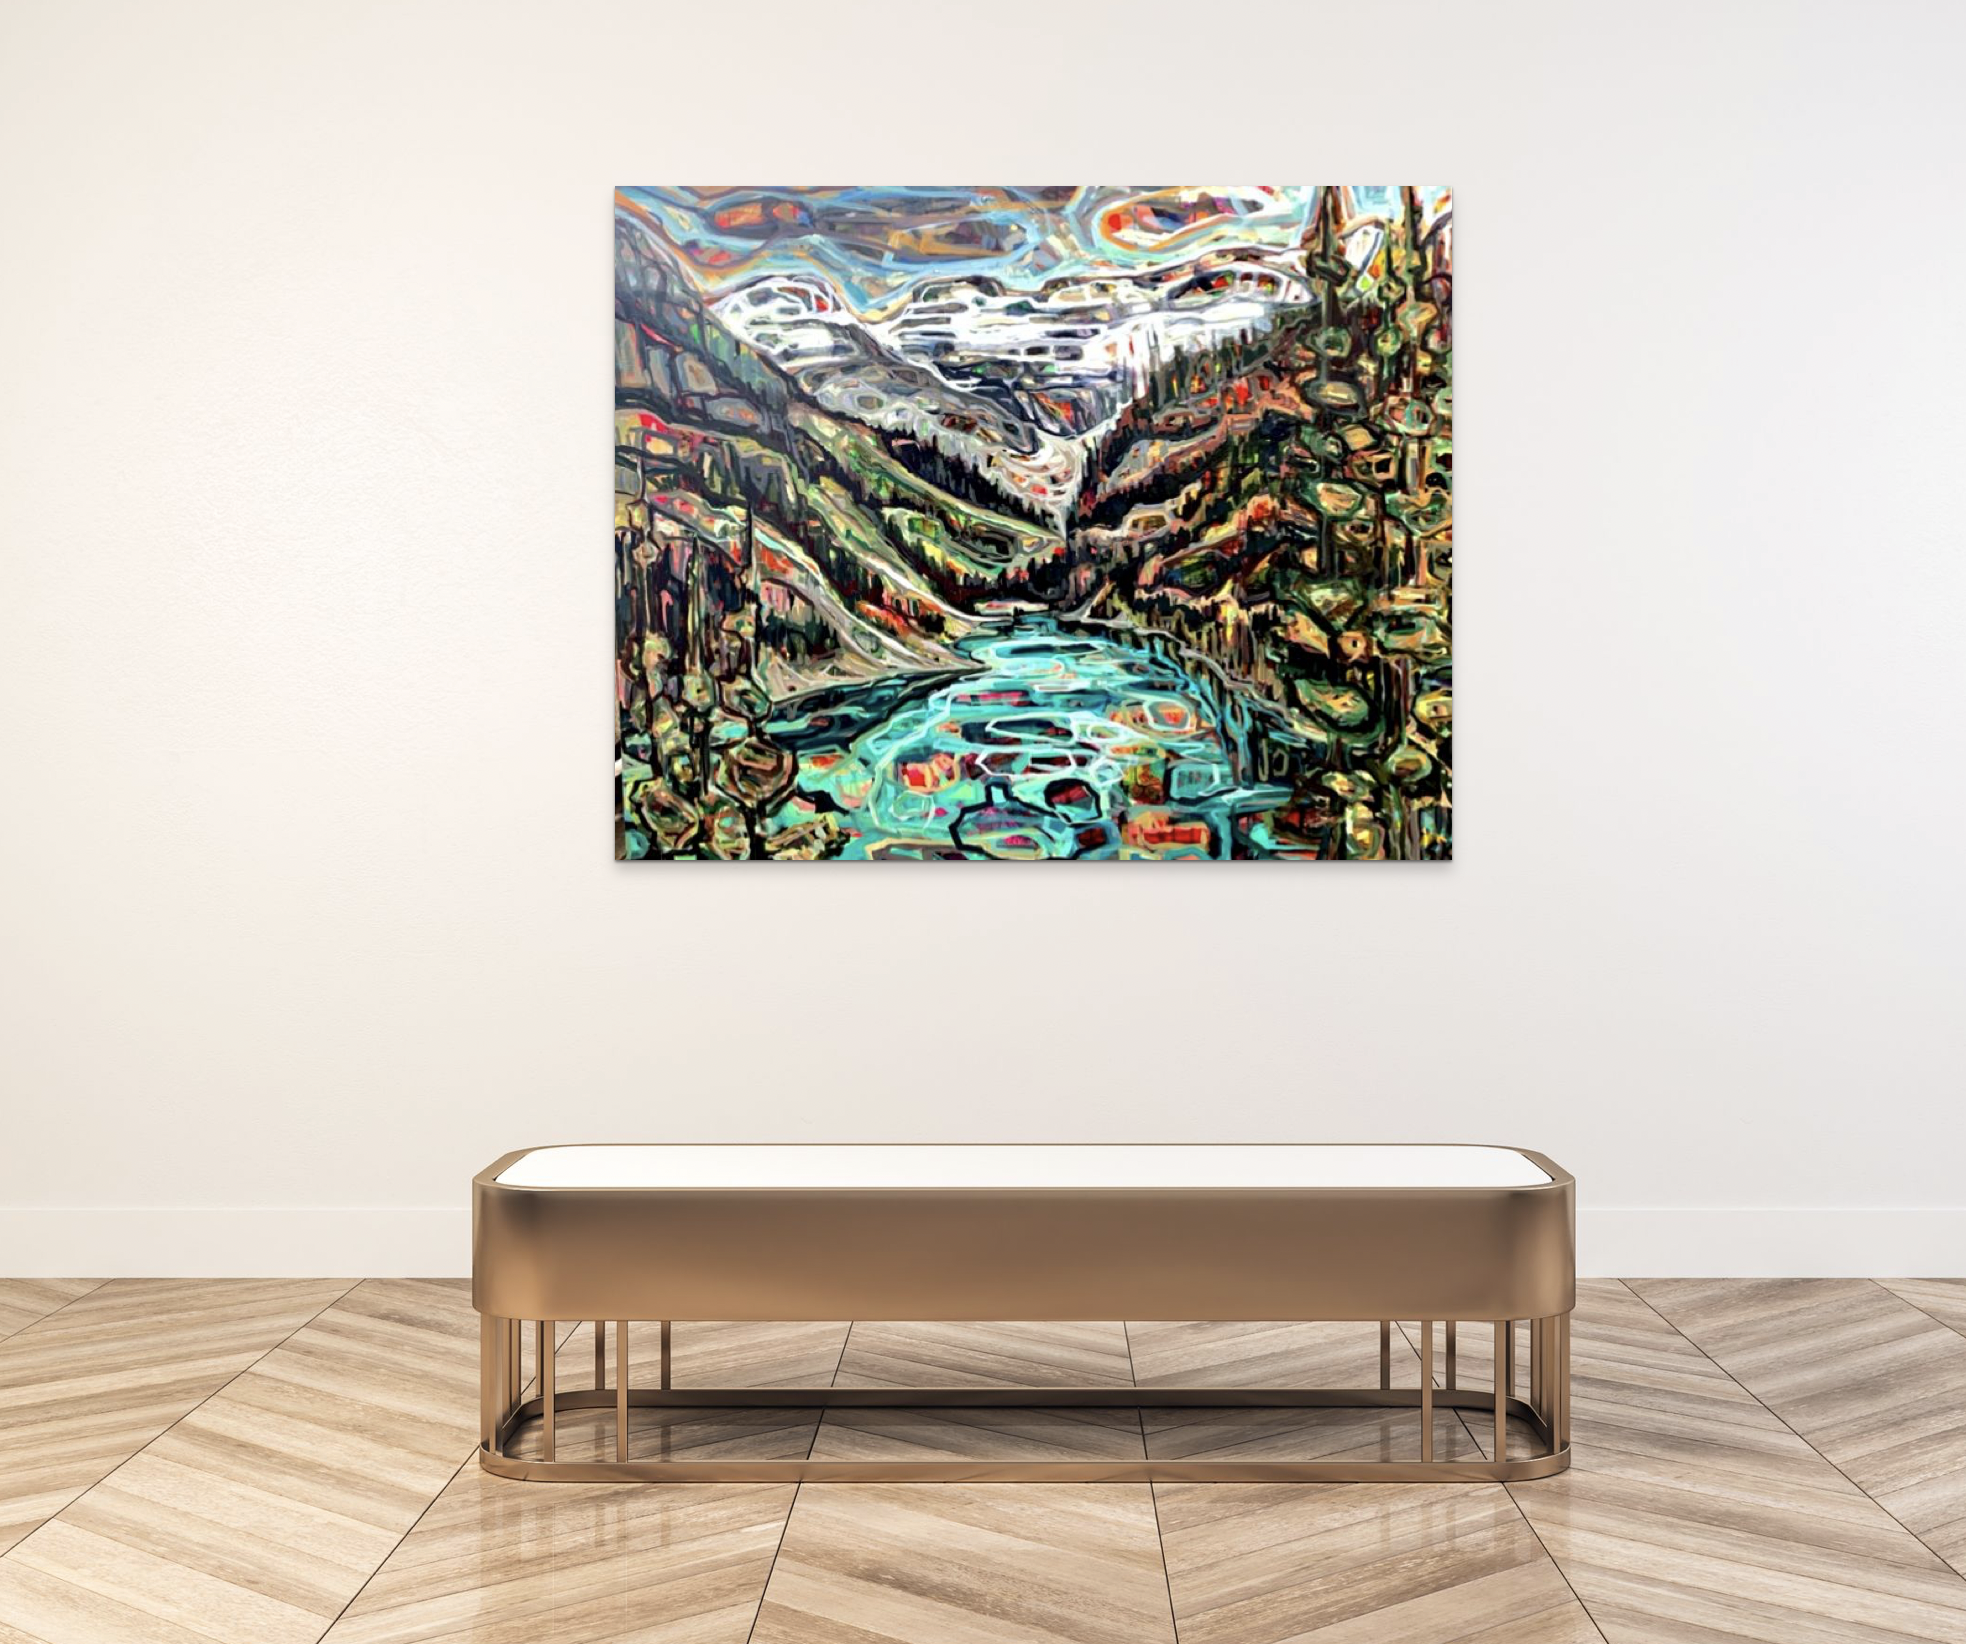 Lake Louise, acrylic painting by Sandy Kunze | Effusion Art Gallery + Cast Glass Studio, Invermere BC